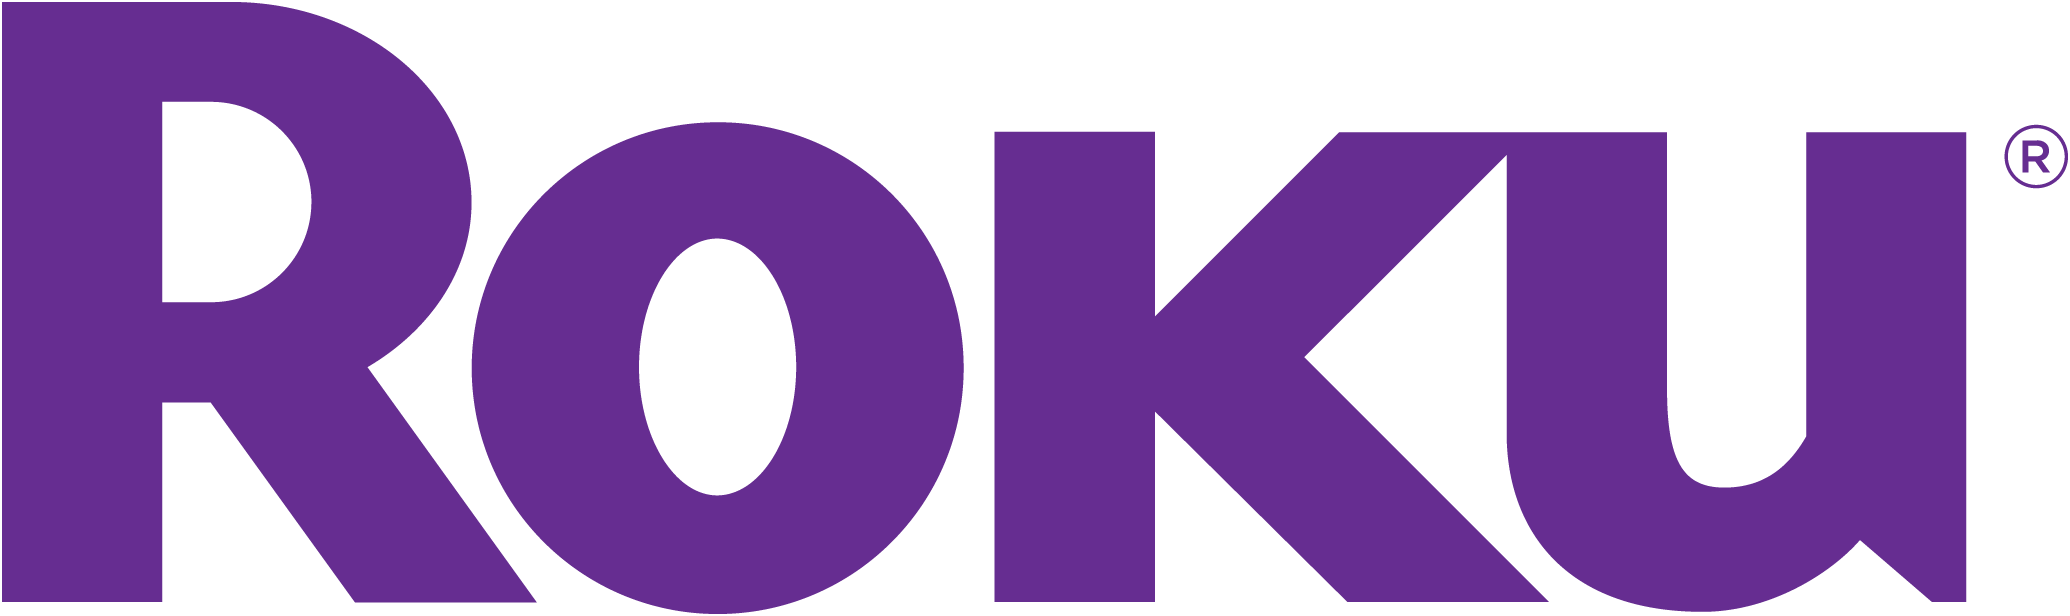 The Roku Channel | What's On | Roku